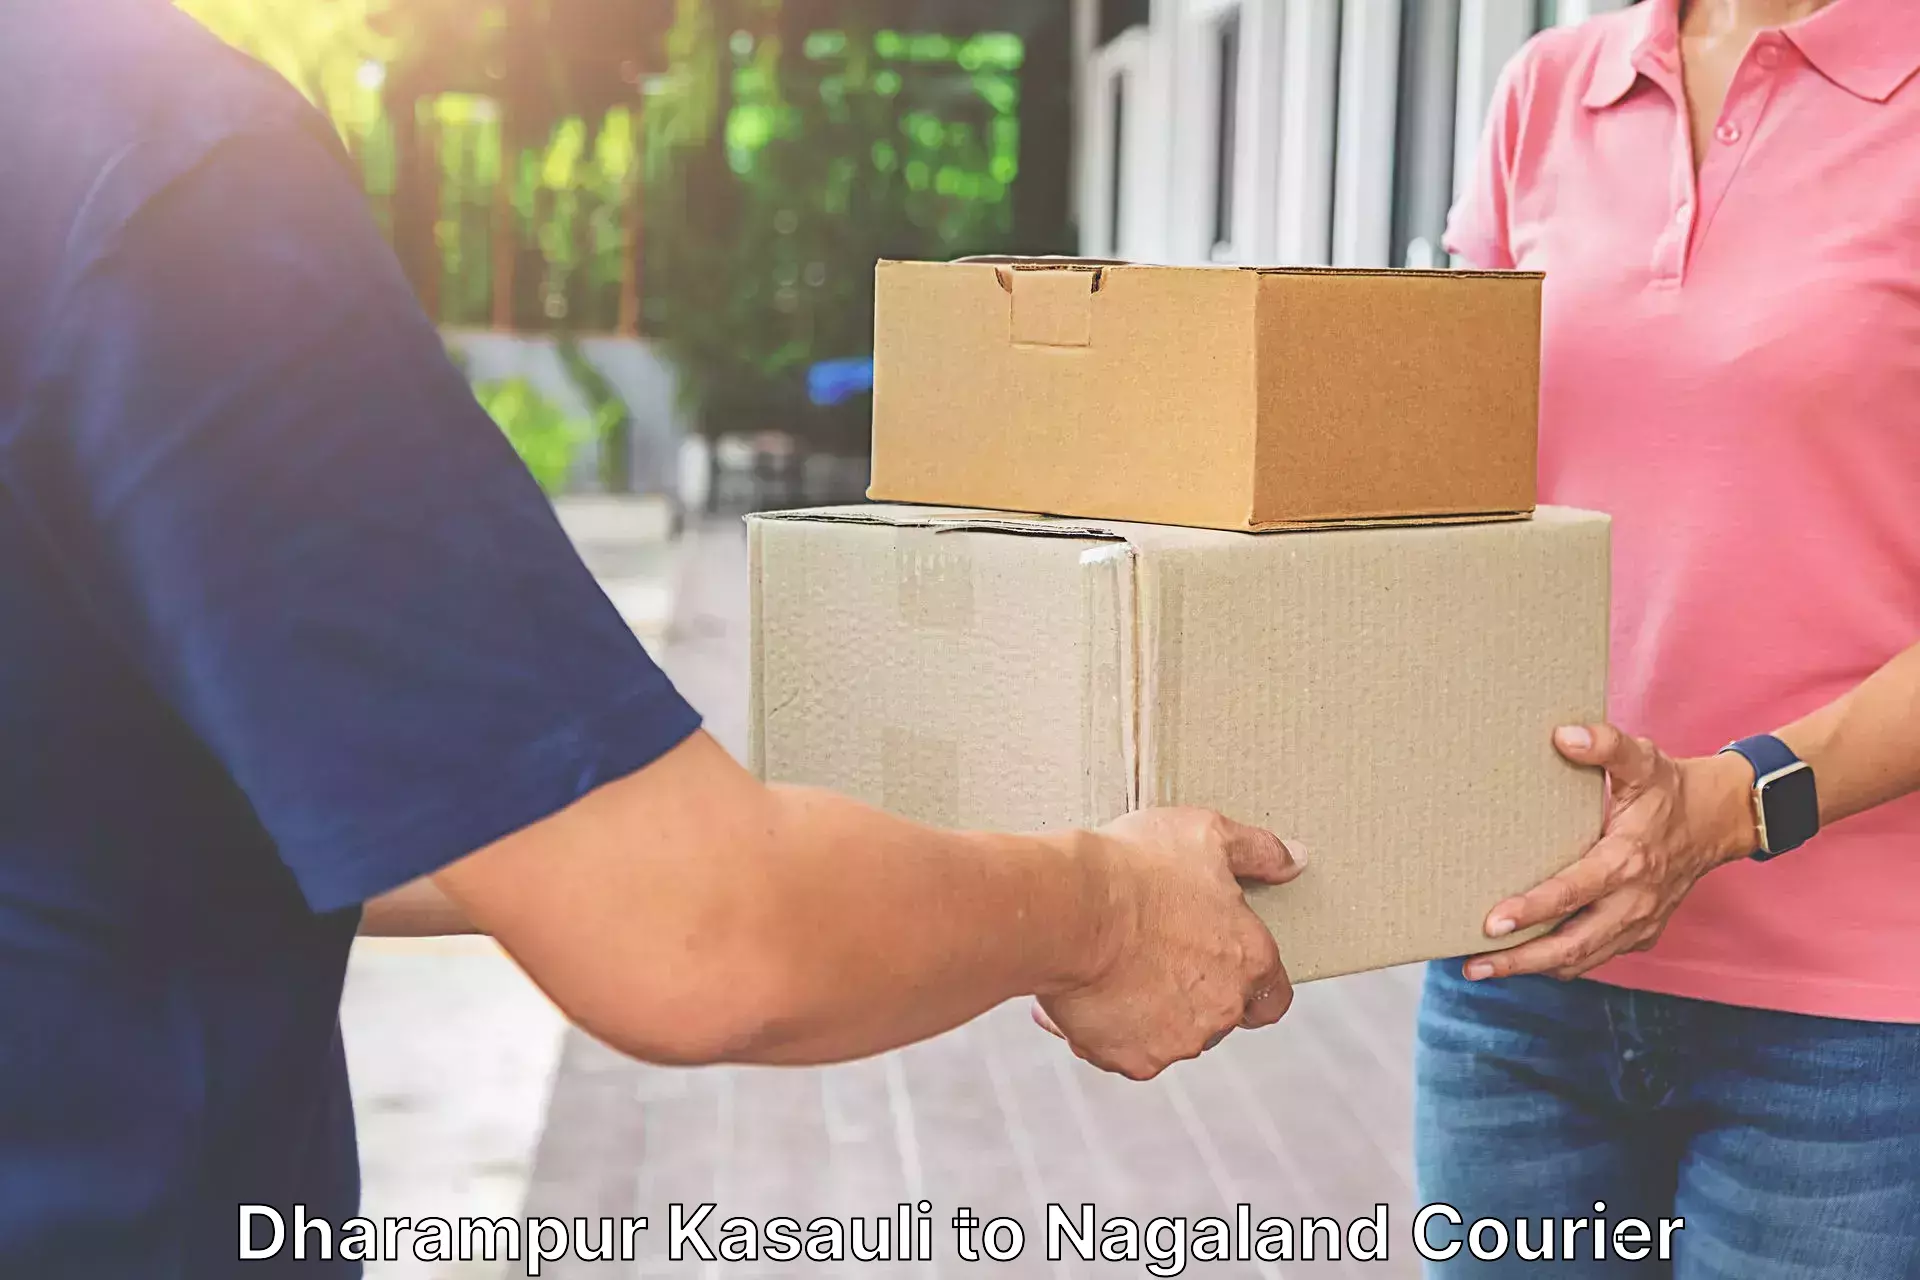 Professional courier services Dharampur Kasauli to Nagaland